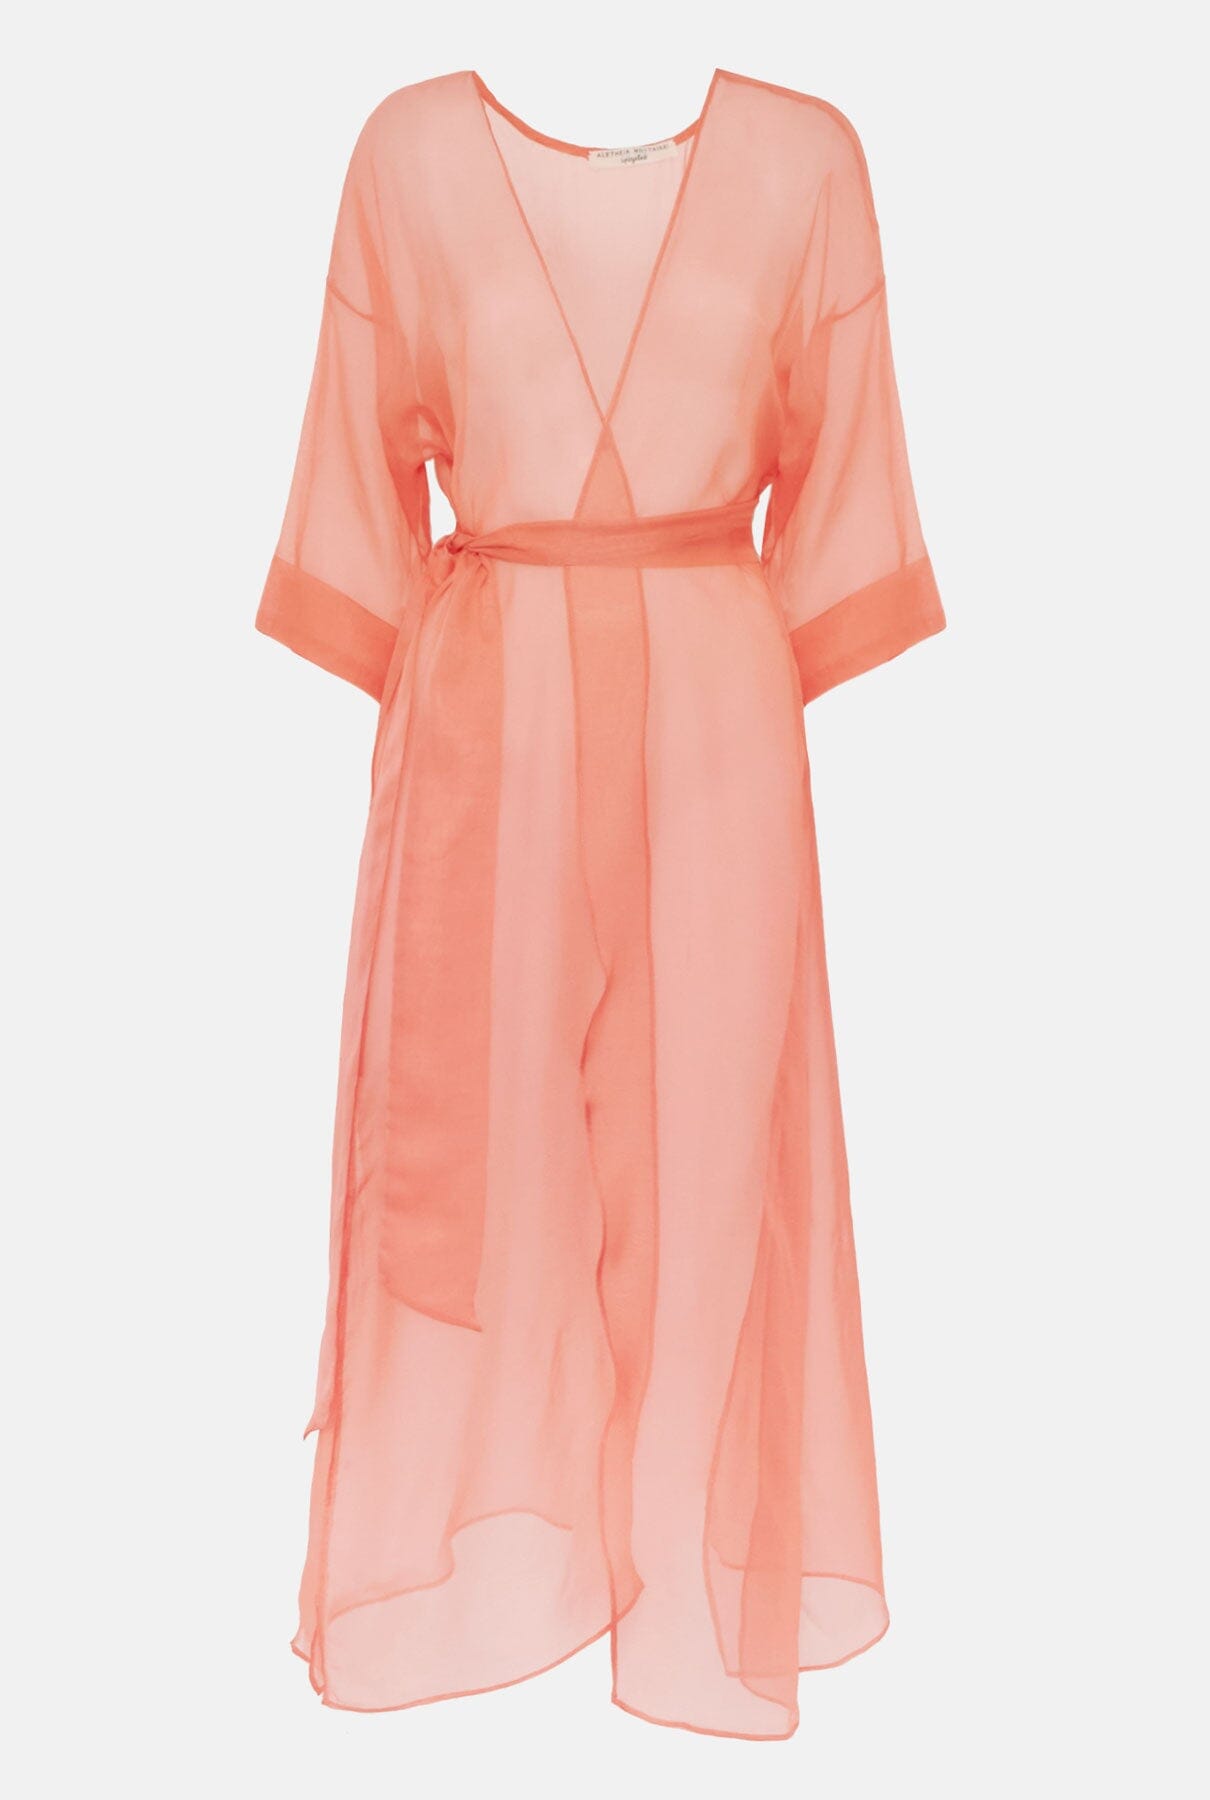 Persefone overdress pink Capes & shawls Atelier Aletheia 